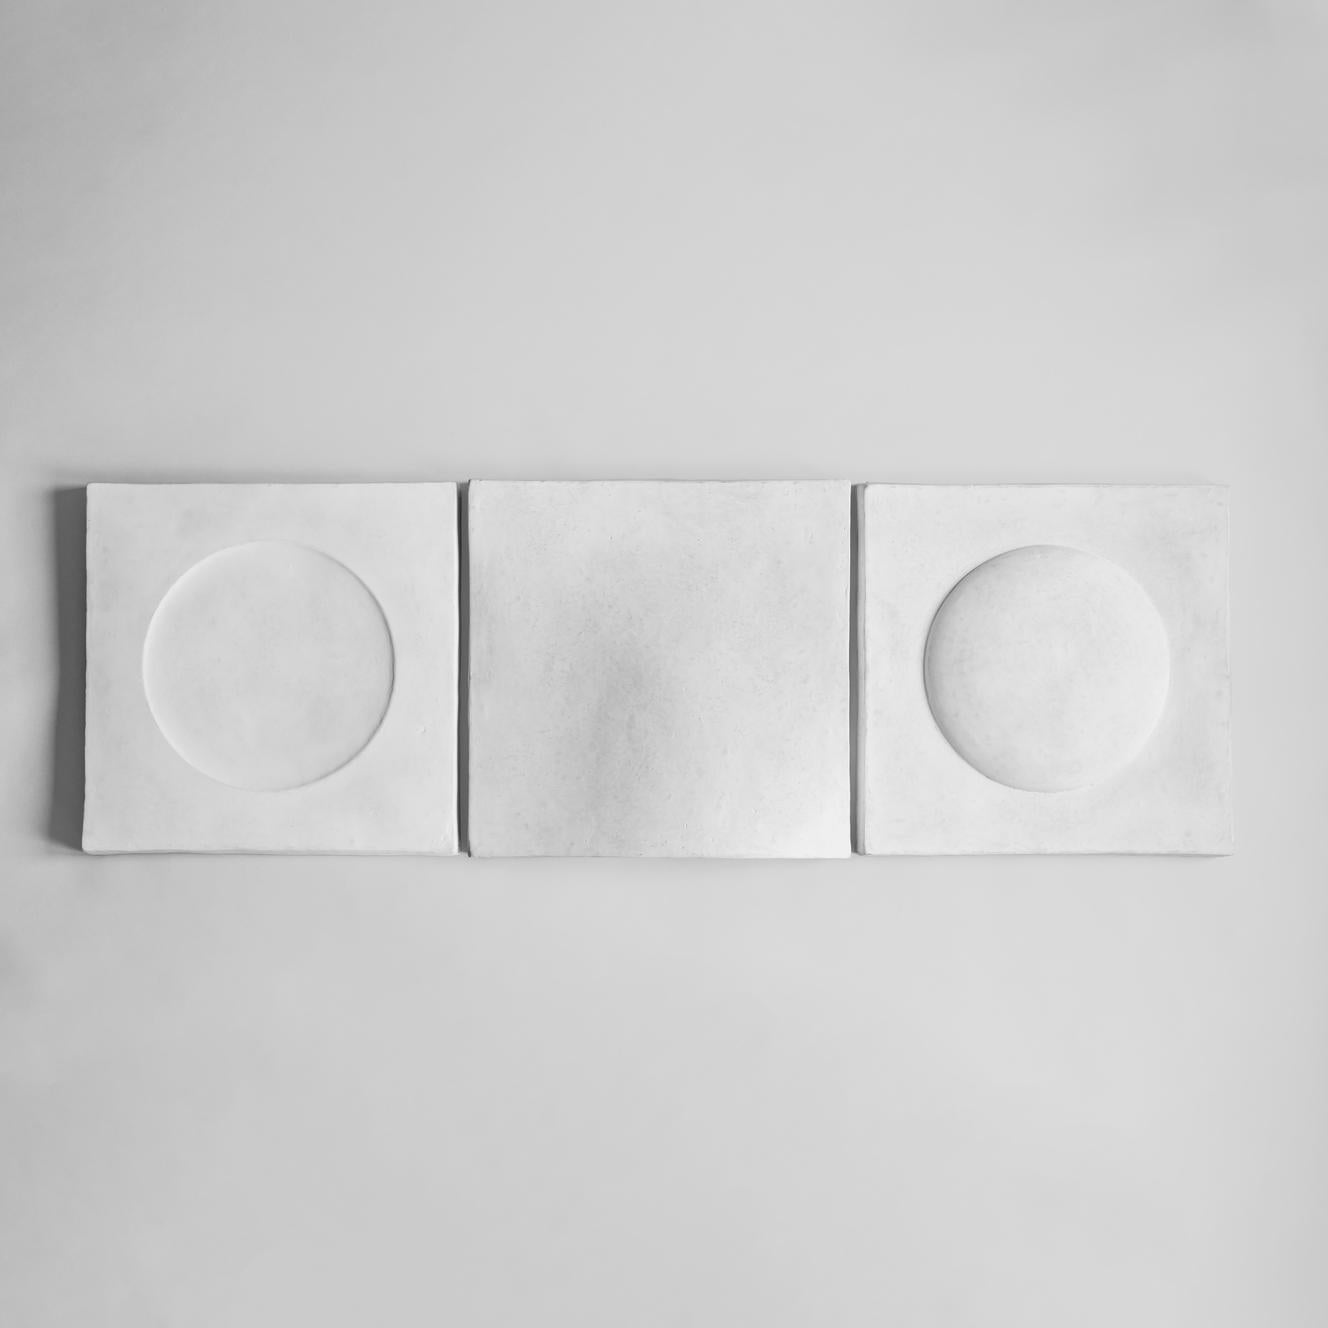 White Sculpt Art Bubble by 101 Copenhagen
Designed by Kristian Sofus Hansen & Tommy Hyldahl
Dimensions: L58 / W12,5 / H58 CM
Materials: Sustainable Paper Mass

Sculp Wall Art questions the idea of traditional wall pictures, in the search for a